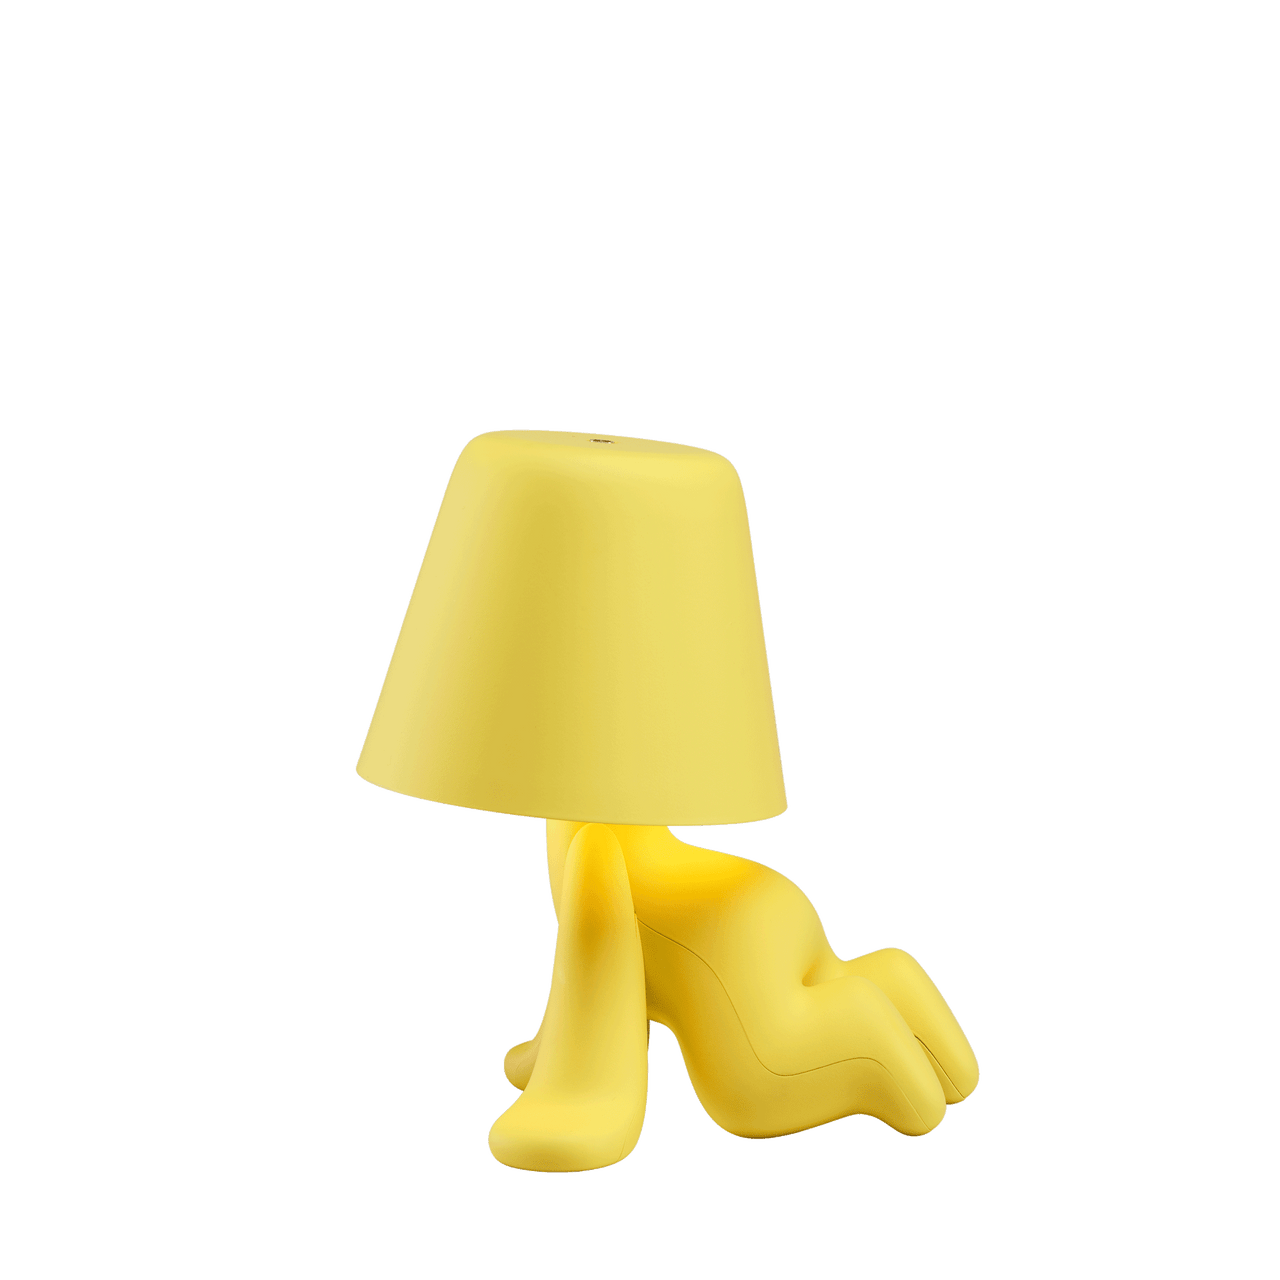 Sweet Brothers Ron Lamp | Designed by Stefano Giovannoni | Qeeboo